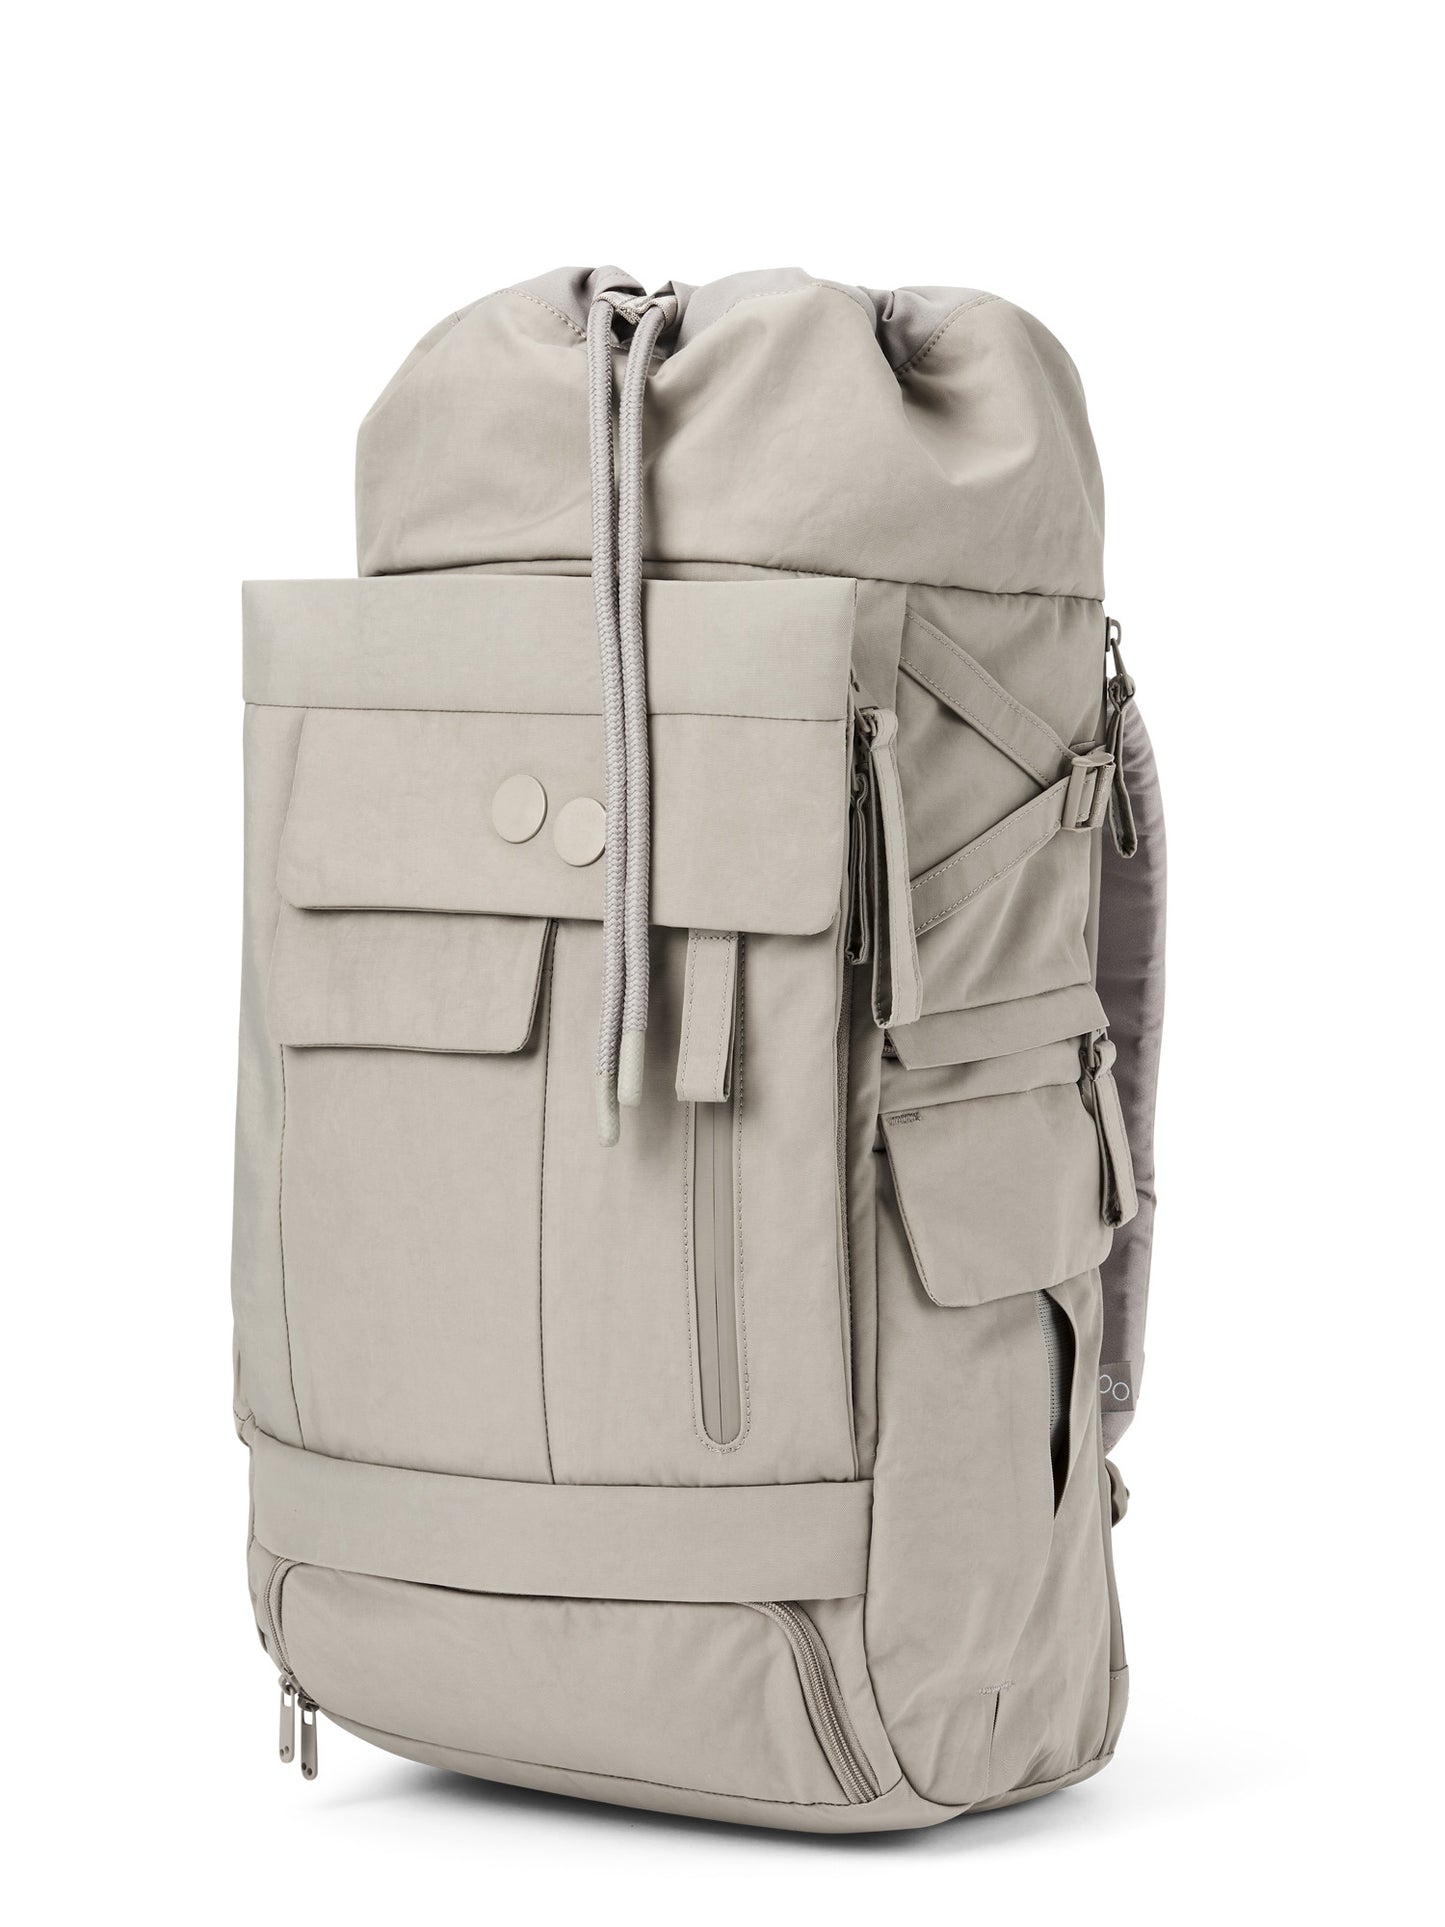 pinqponq-backpack-Blok-Large-Crinkle-Taupe-front